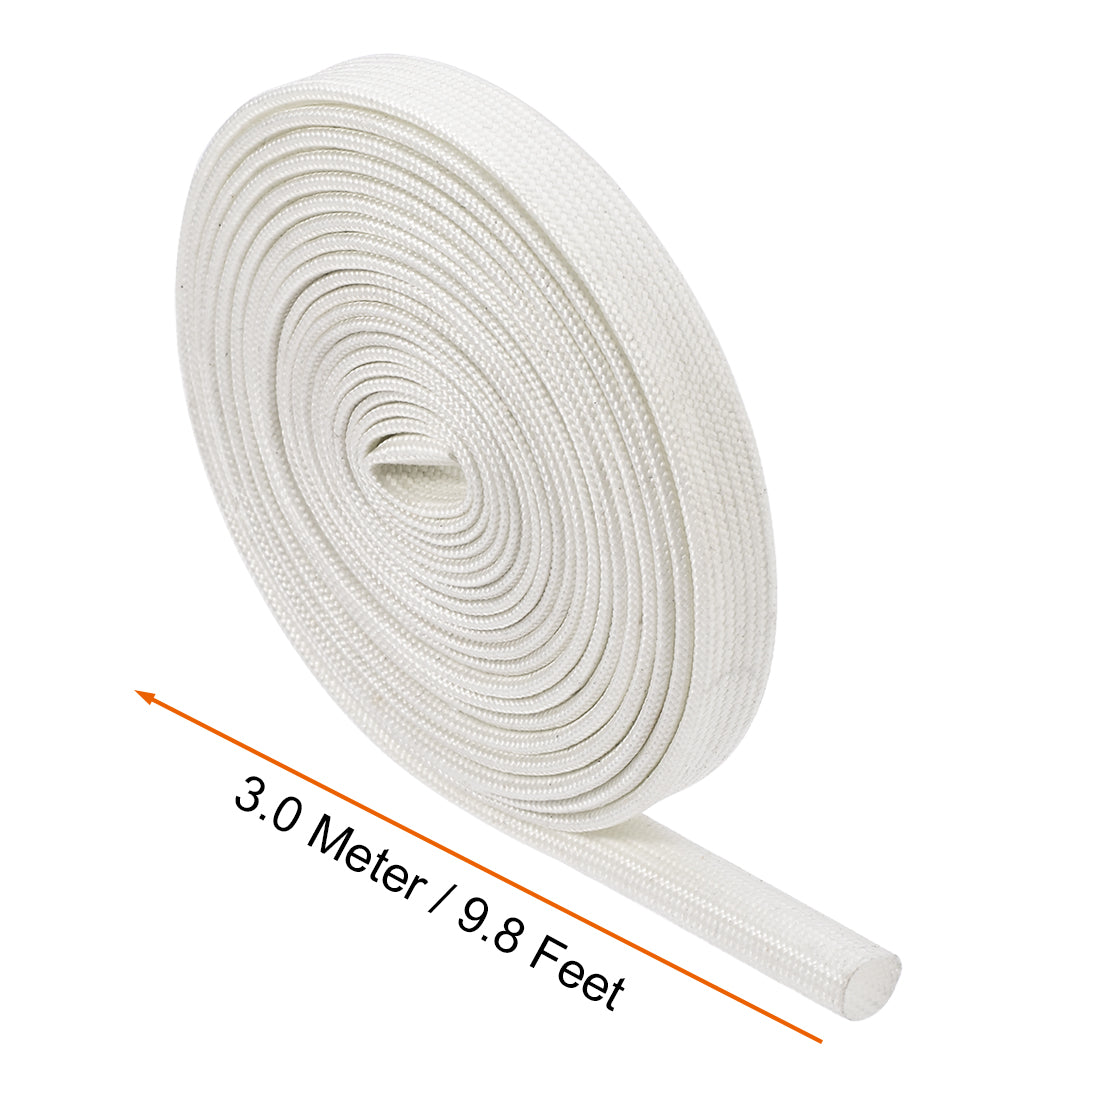 uxcell Uxcell Insulation Cable Protector, 9.8Ft-7mm High TEMP Silicone Fiberglass Sleeve White